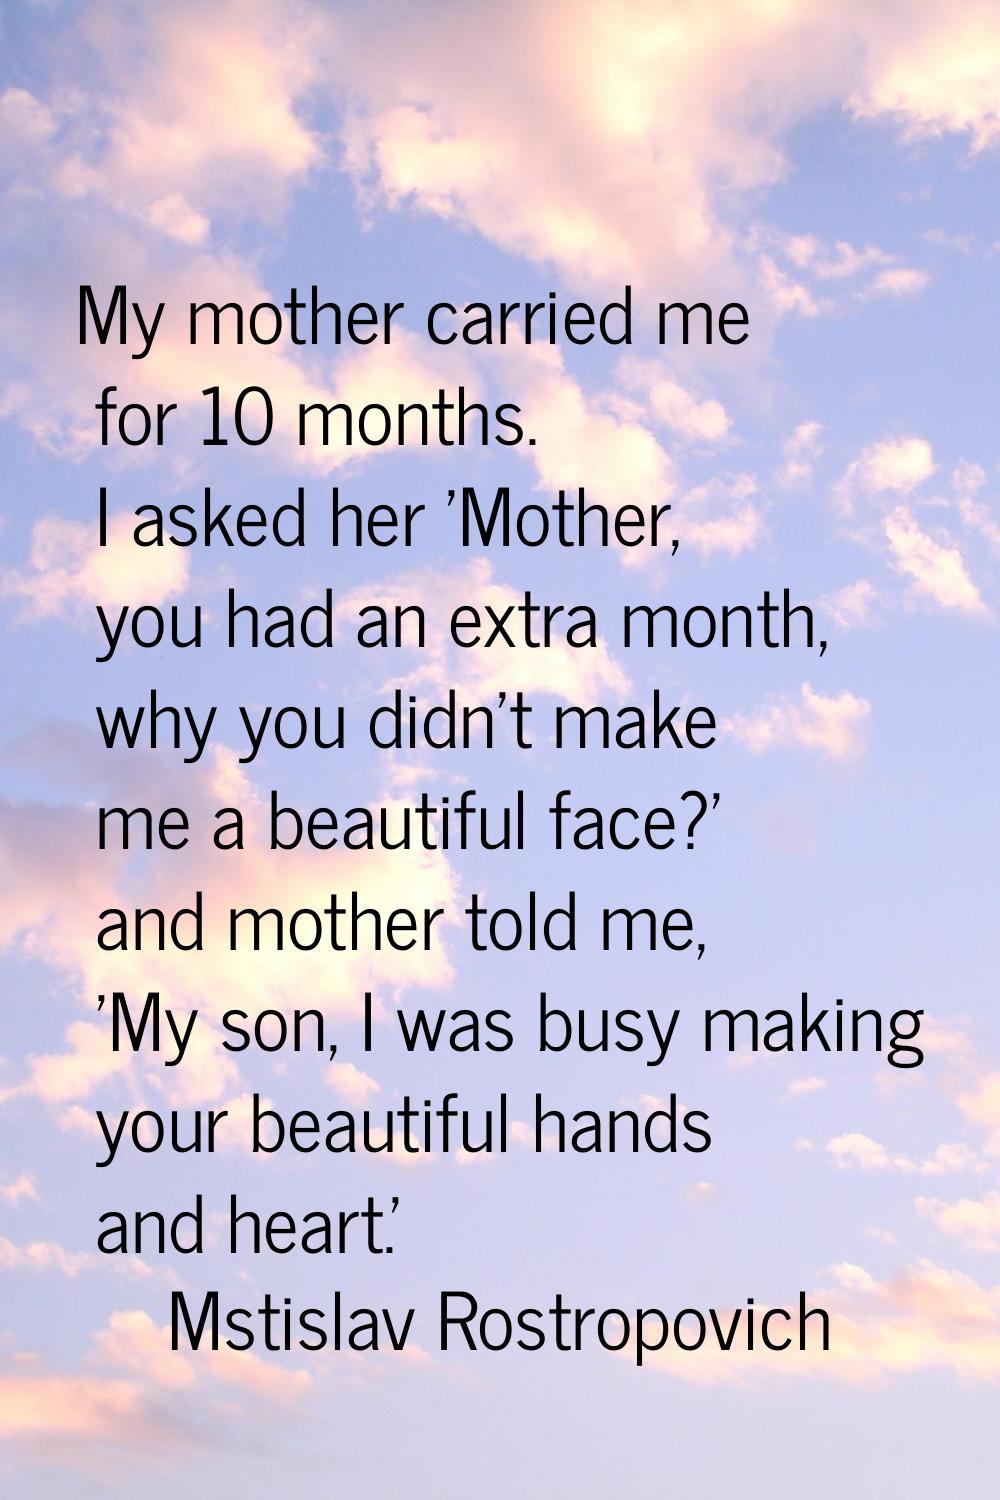 My mother carried me for 10 months. I asked her 'Mother, you had an extra month, why you didn't mak